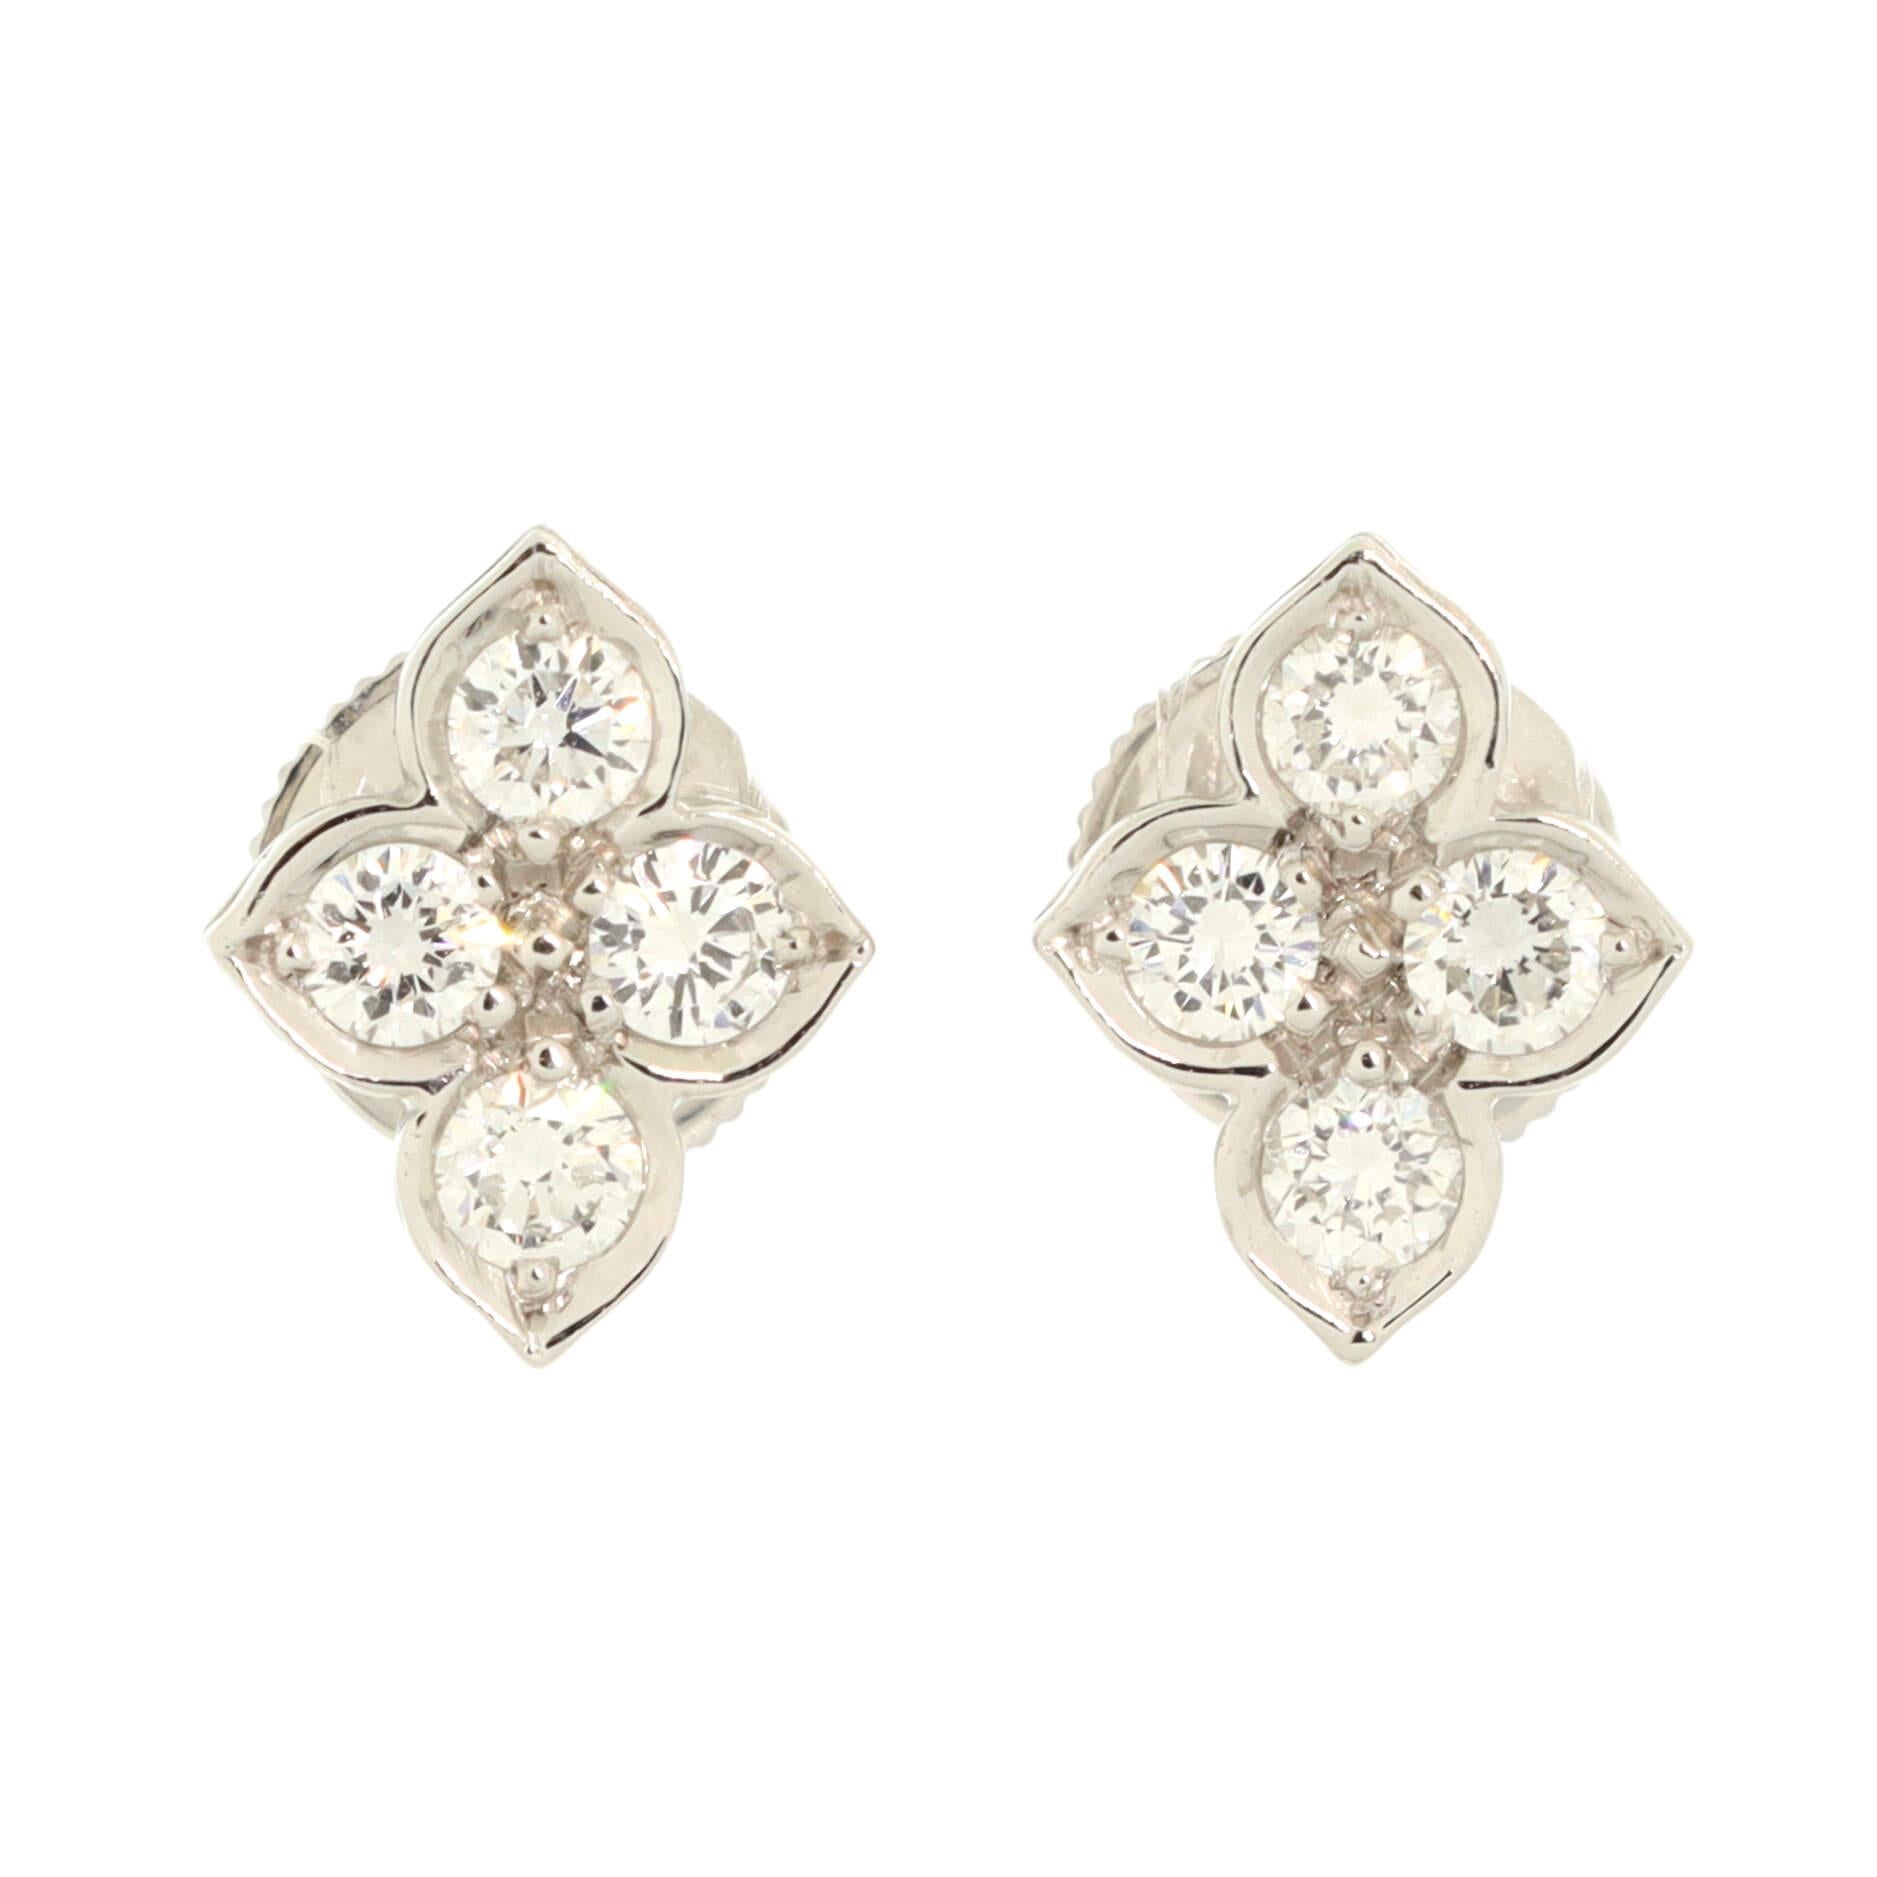 Condition: Very good. Minor wear throughout.
Accessories: No Accessories
Measurements: Height/Length: 8.75 mm, Width: 10.95 mm
Designer: Cartier
Model: Hindu Floral Stud Earrings 18K White Gold and Diamonds
Exterior Color: White Gold
Item Number: